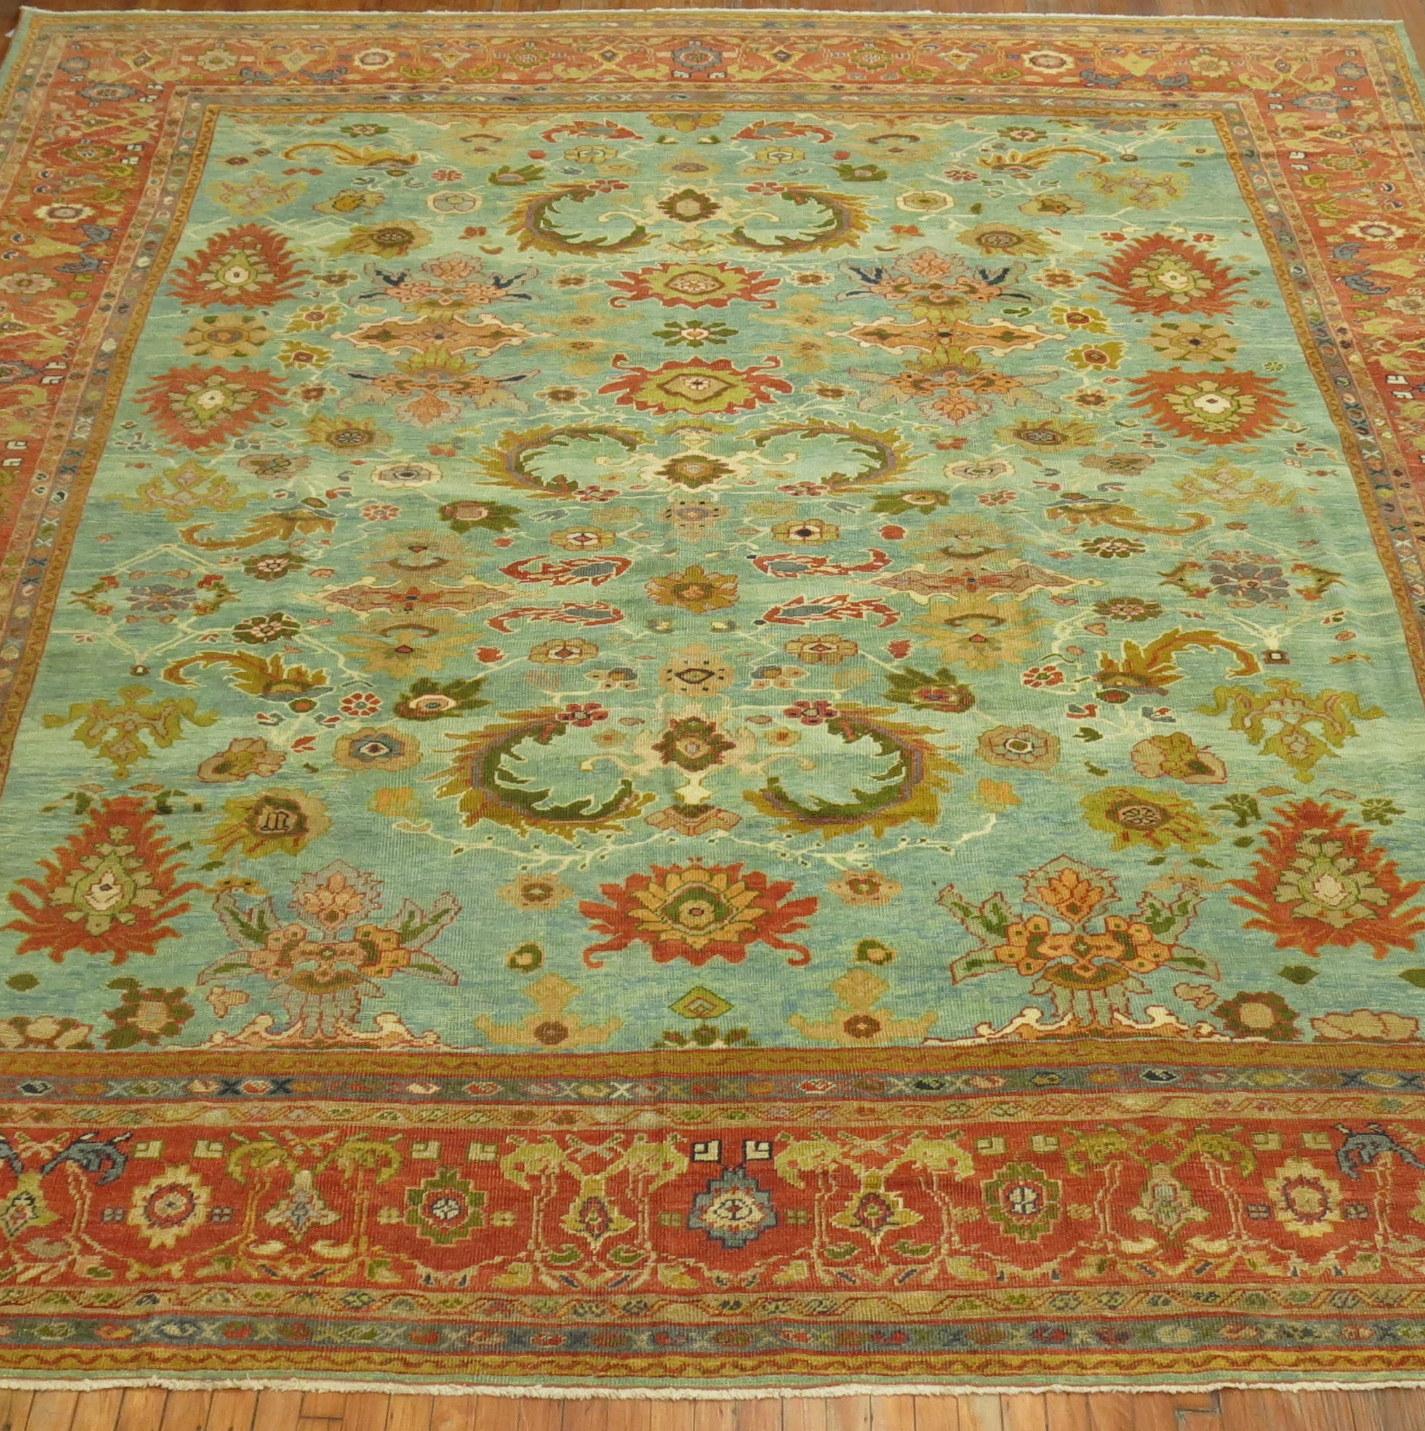 A connoisseur caliber early 20th bright color Persian Mahal Sultanabad carpet with an all-over cobra design

11'9'' x 13'

Woven in a series of villages in Western Central Iran, Sultanabad carpets employ over-scale, spacious all-over patterns that